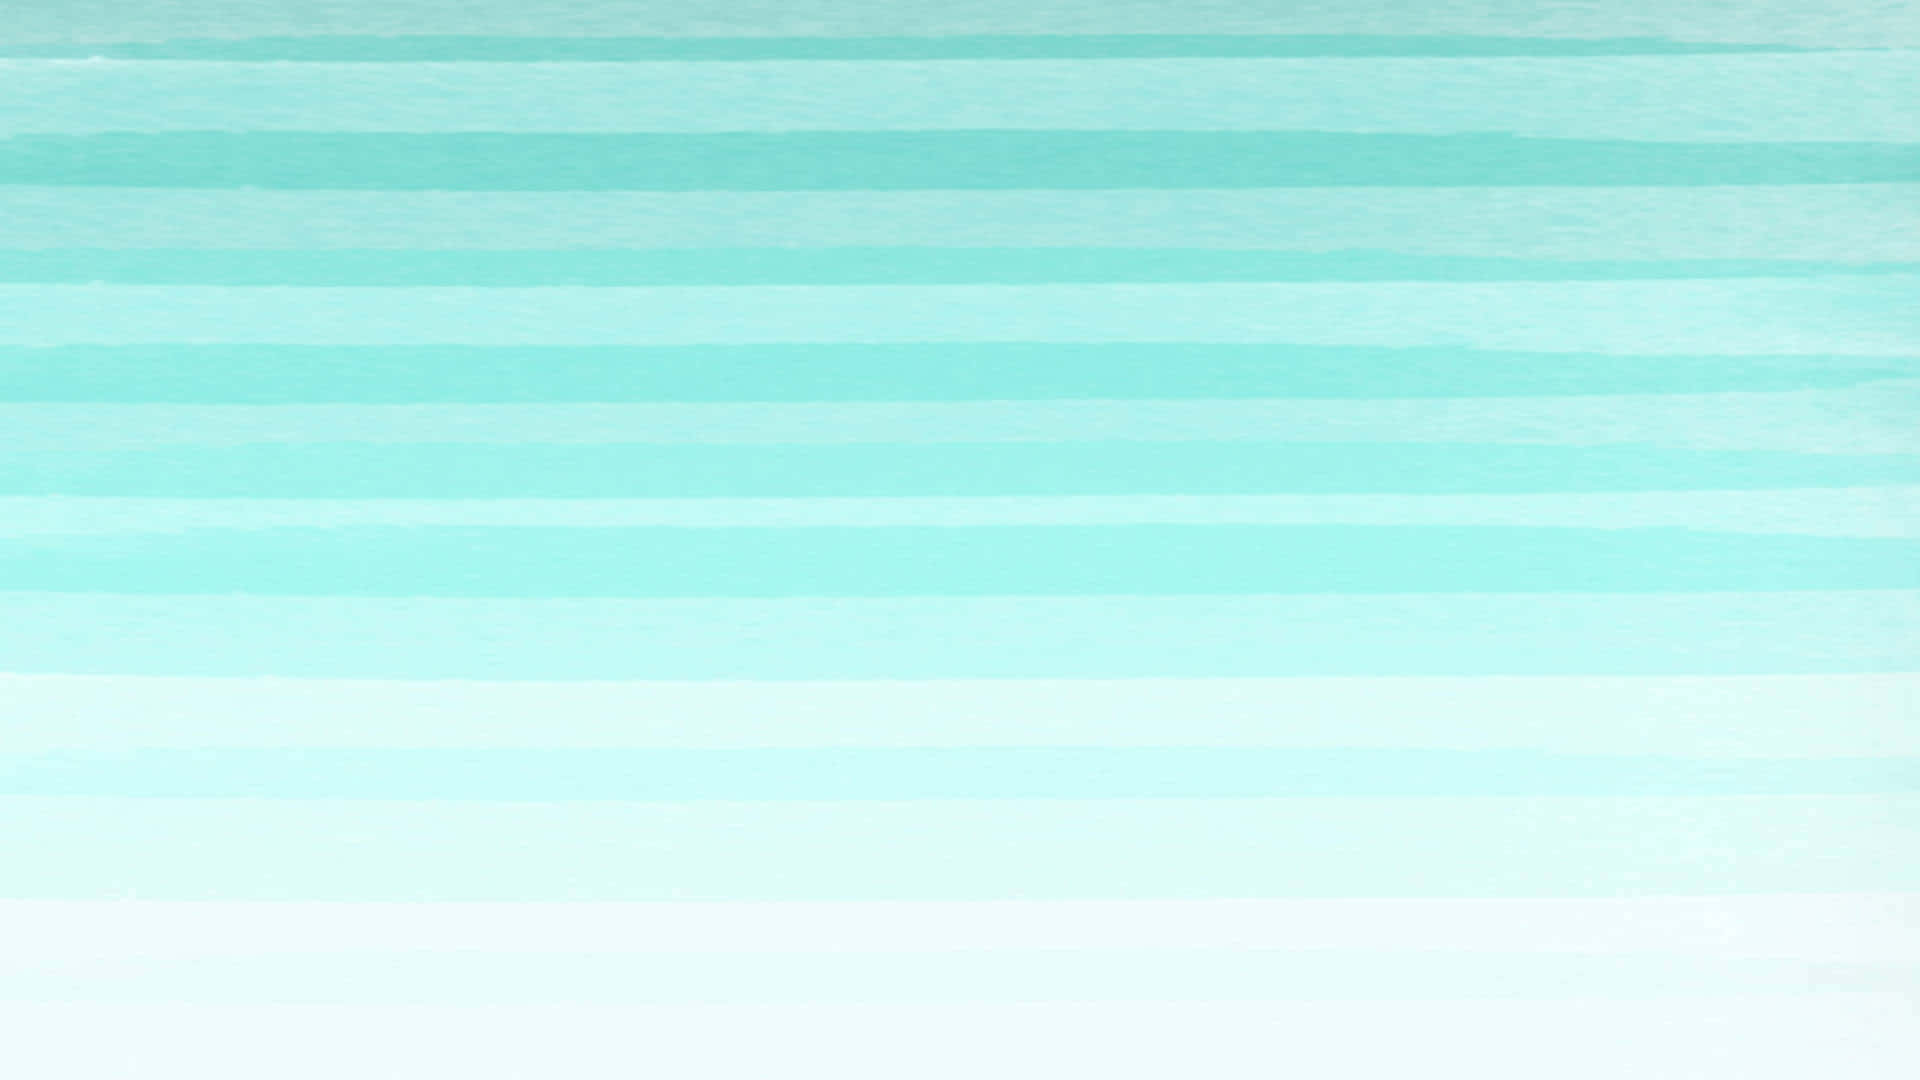 A Watercolor Background With Blue And White Stripes